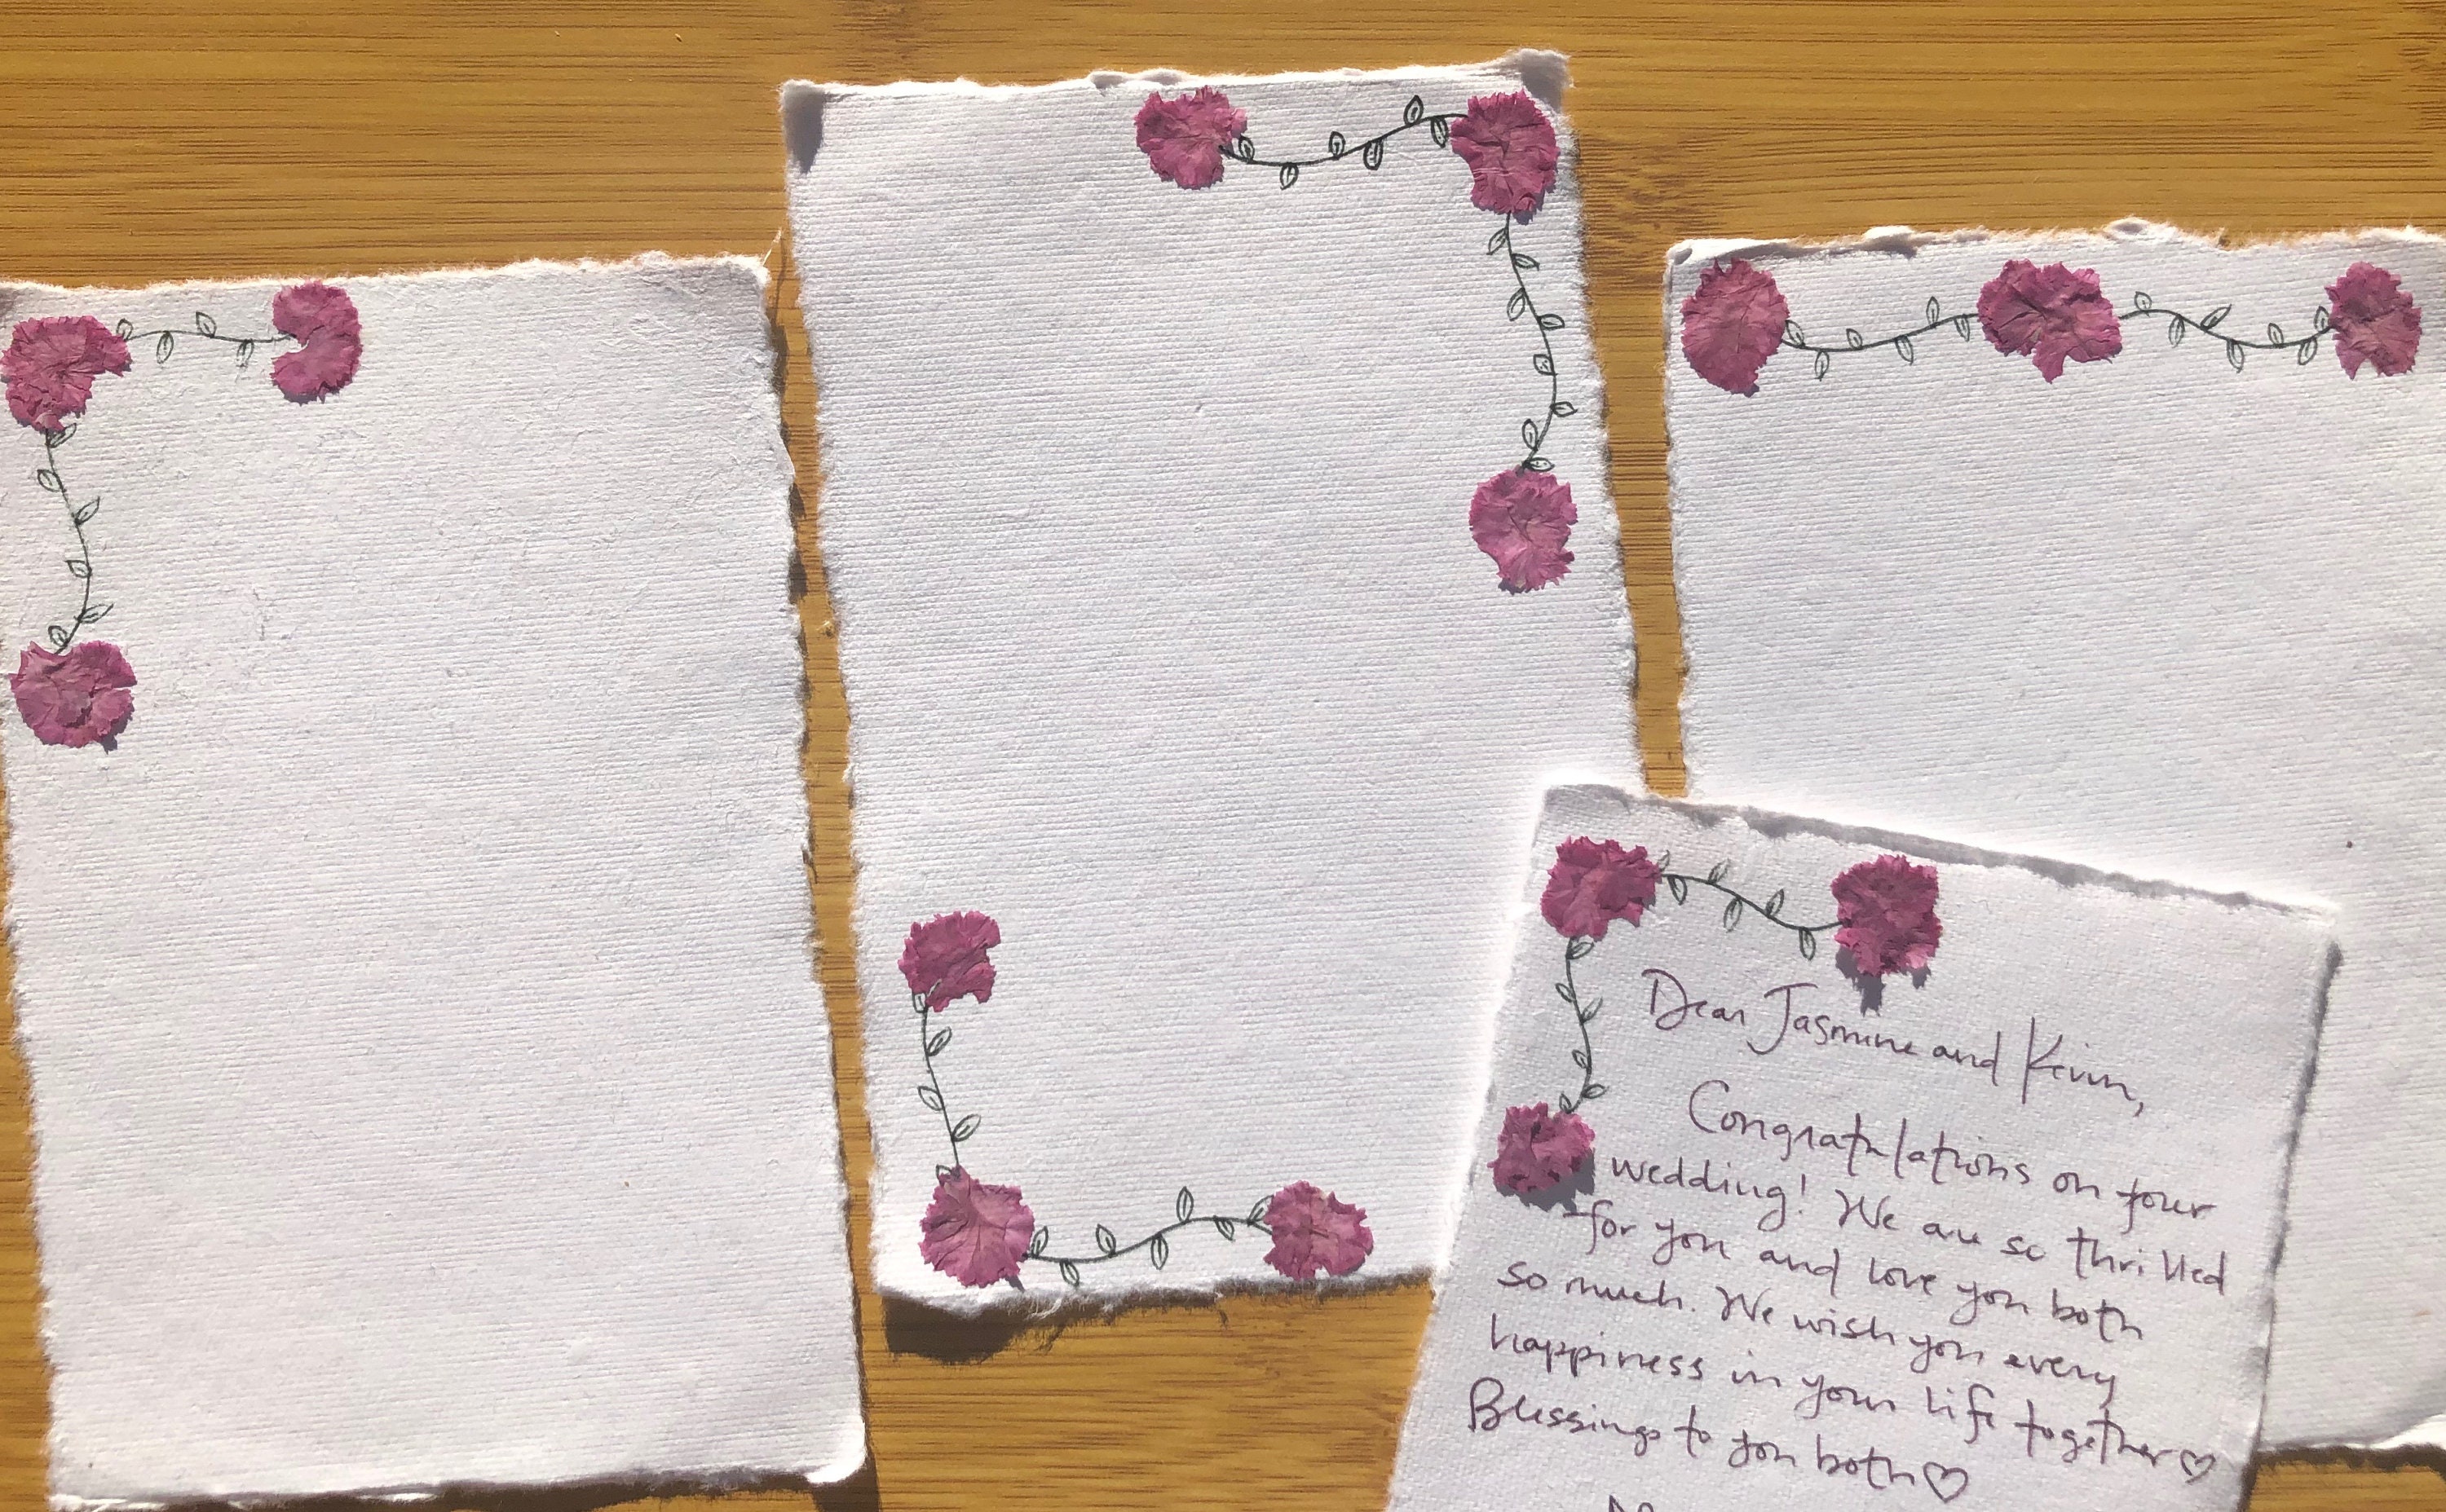 Wanderings Handmade White Deckle Edge Paper Cards with Real Flower Petals - 4x6 Package of 50 - Paper for Cards for Announcements, Invitations, Craft